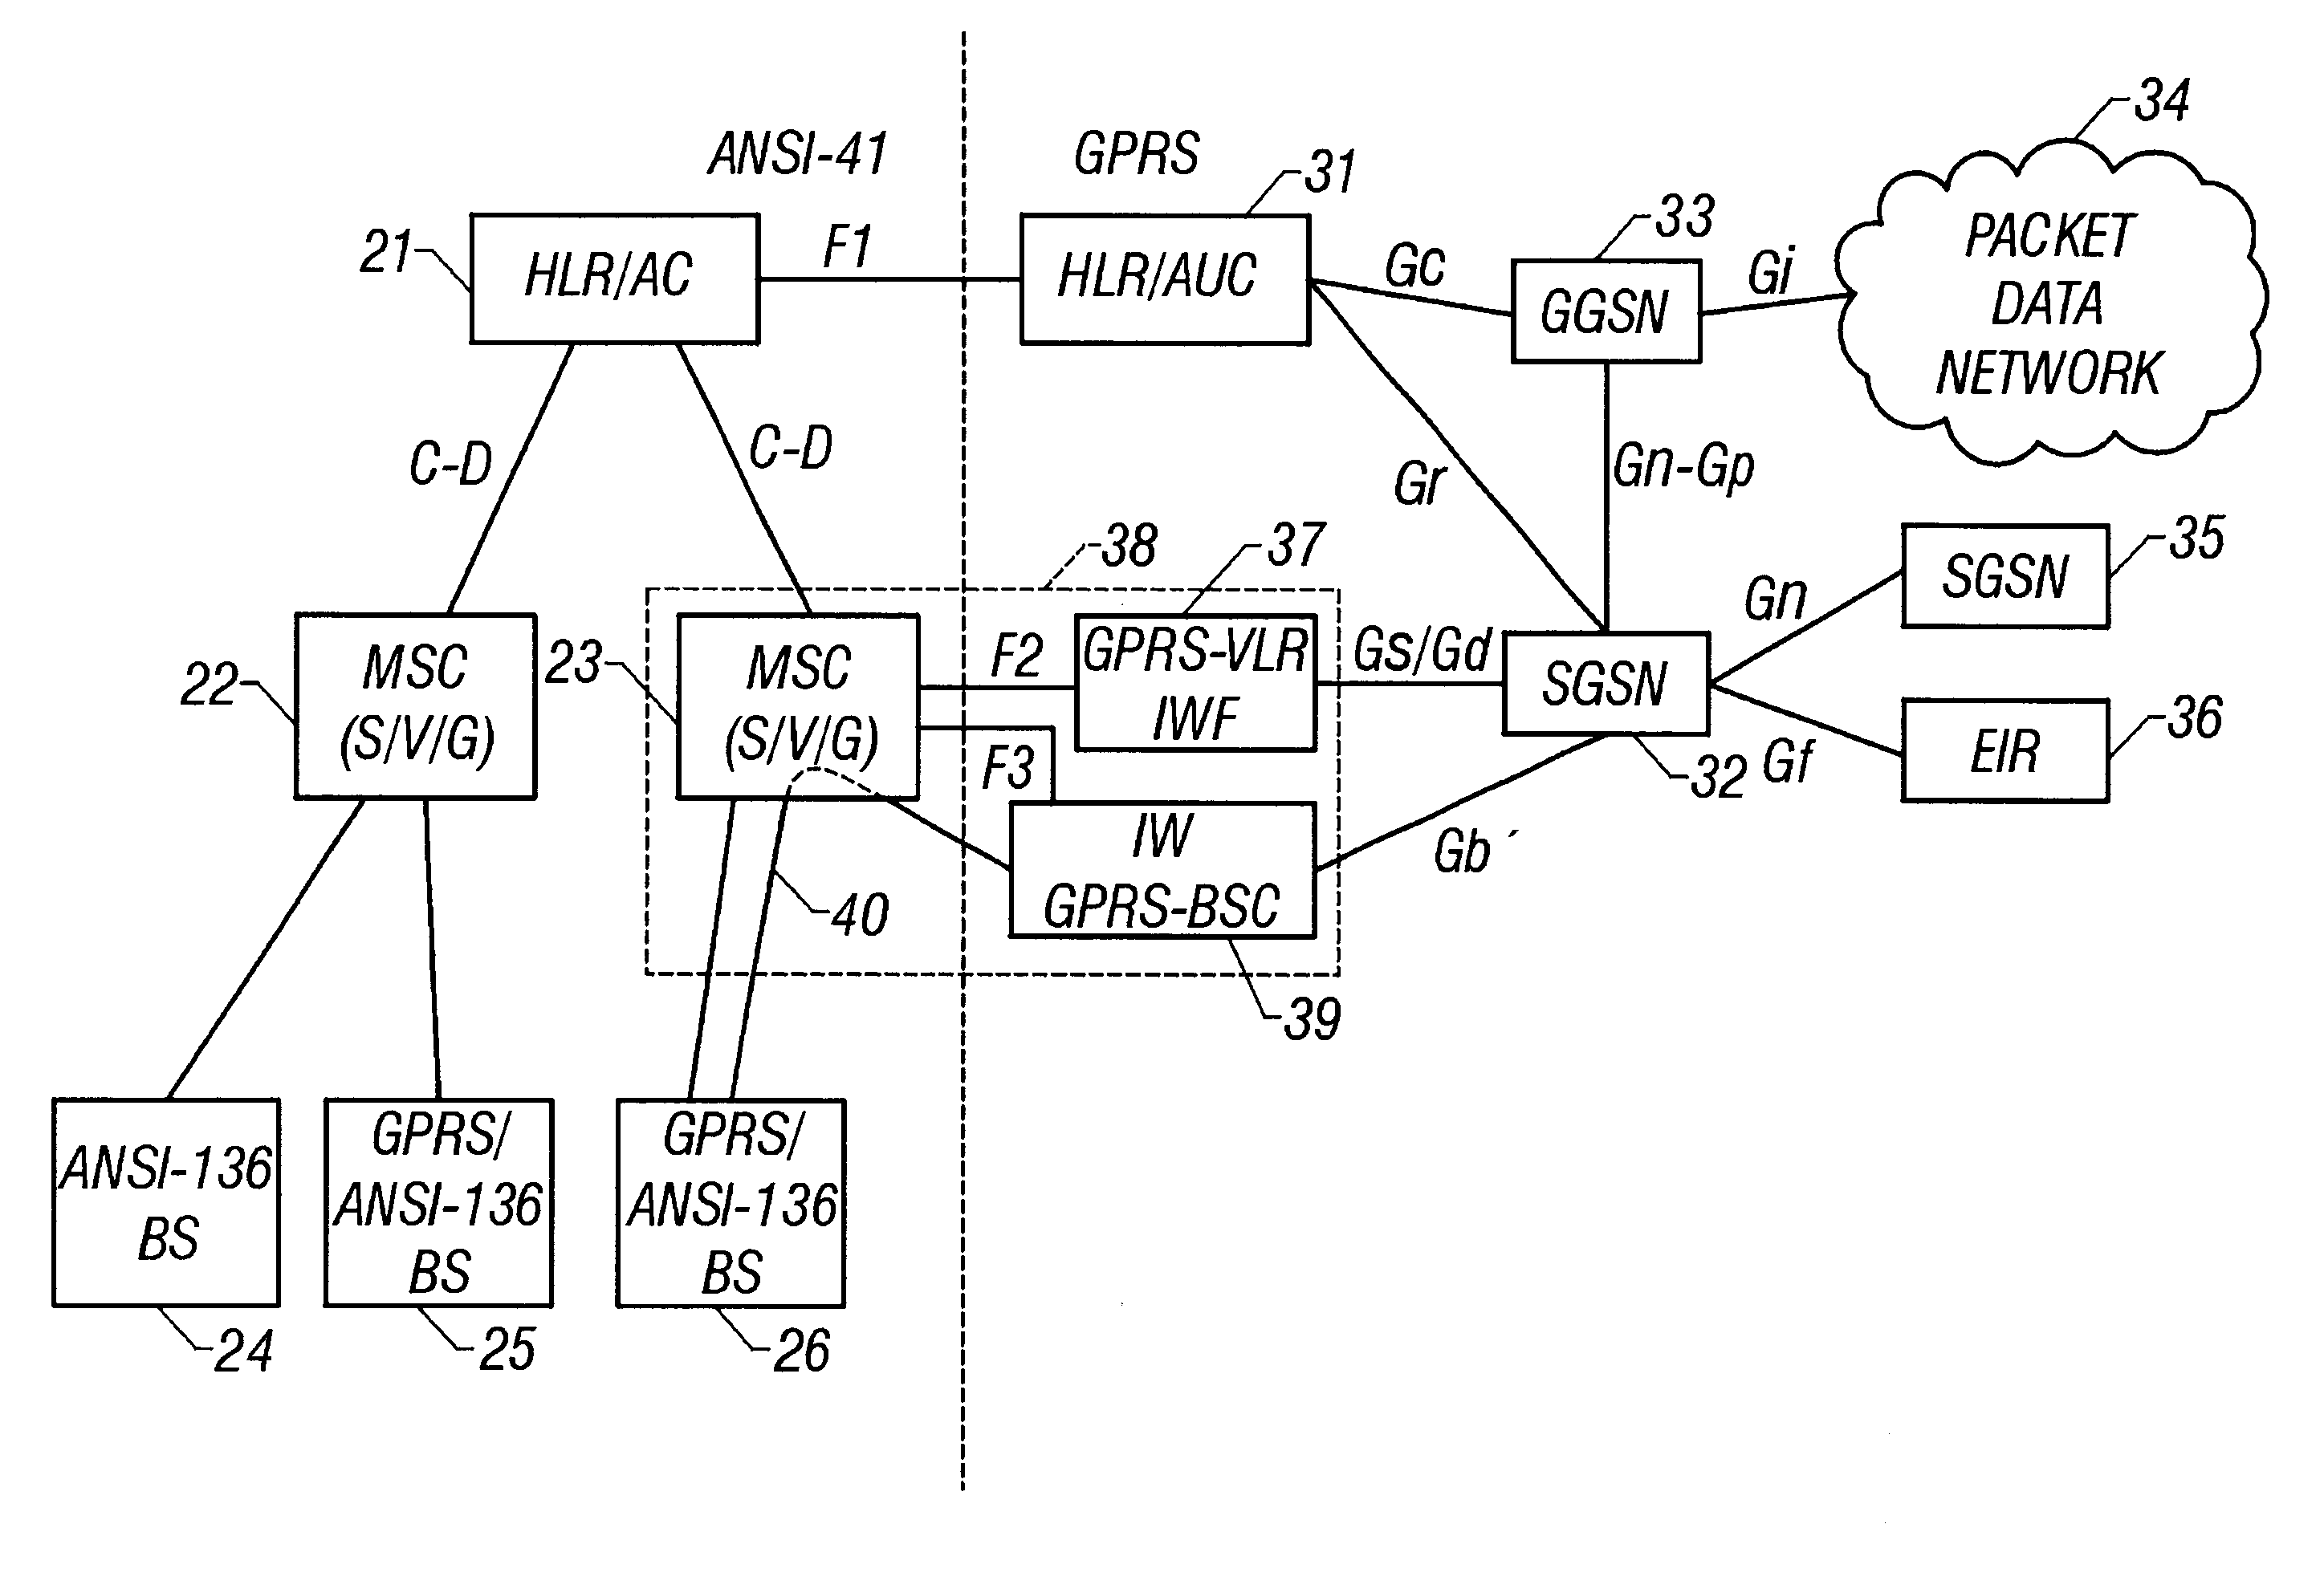 Integrated radio telecommunications network and method of interworking an ANSI-41 network and the general packet radio service (GPRS)